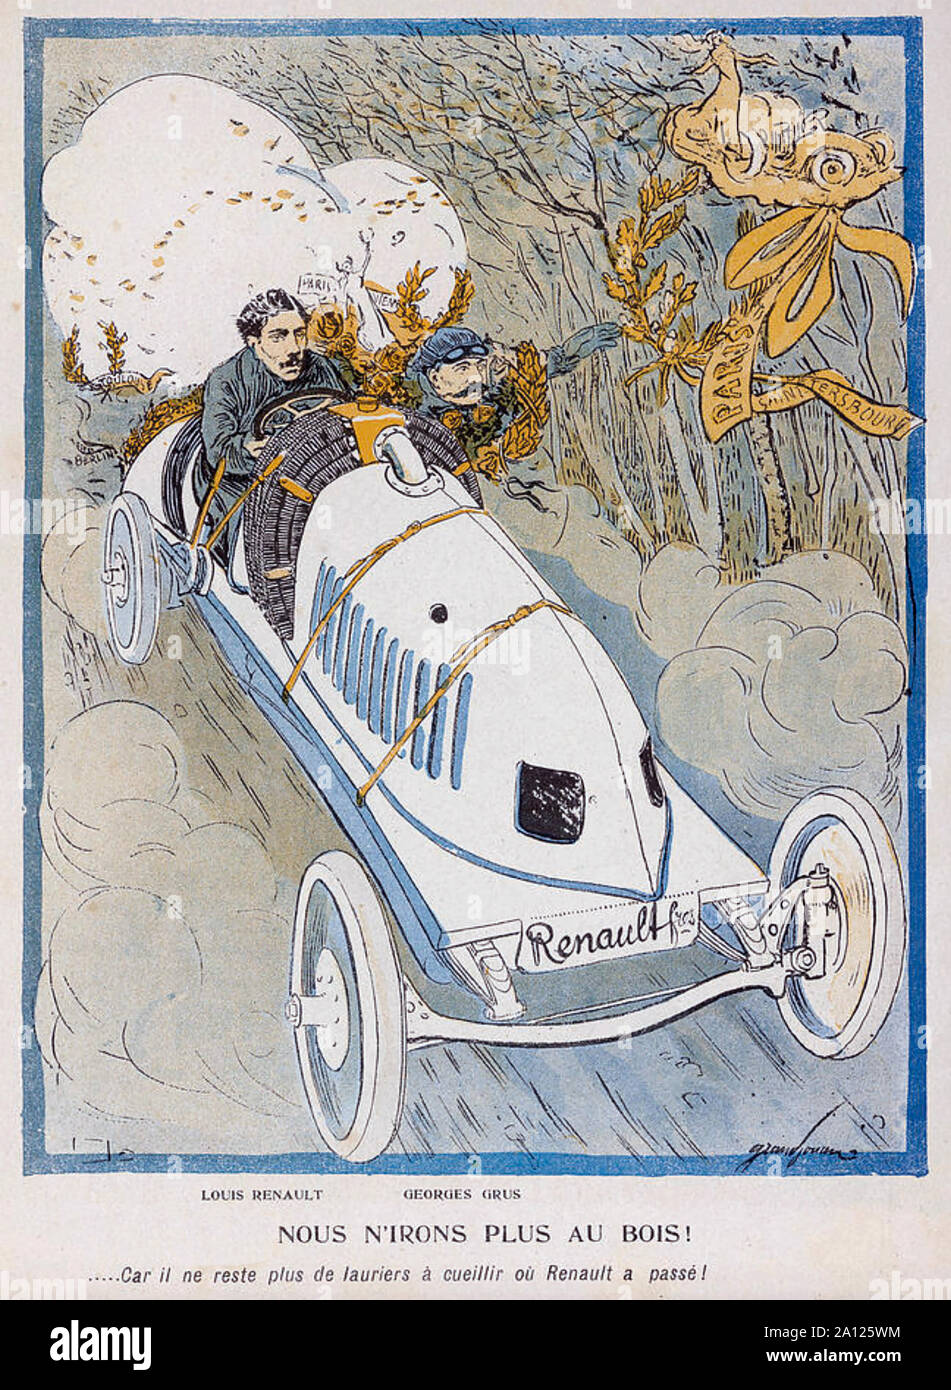 LOUIS RENAULT (1877-1944) automobile pioneer with his co-driver Georges Grus in the Paris to Vienna race of 1904 Stock Photo